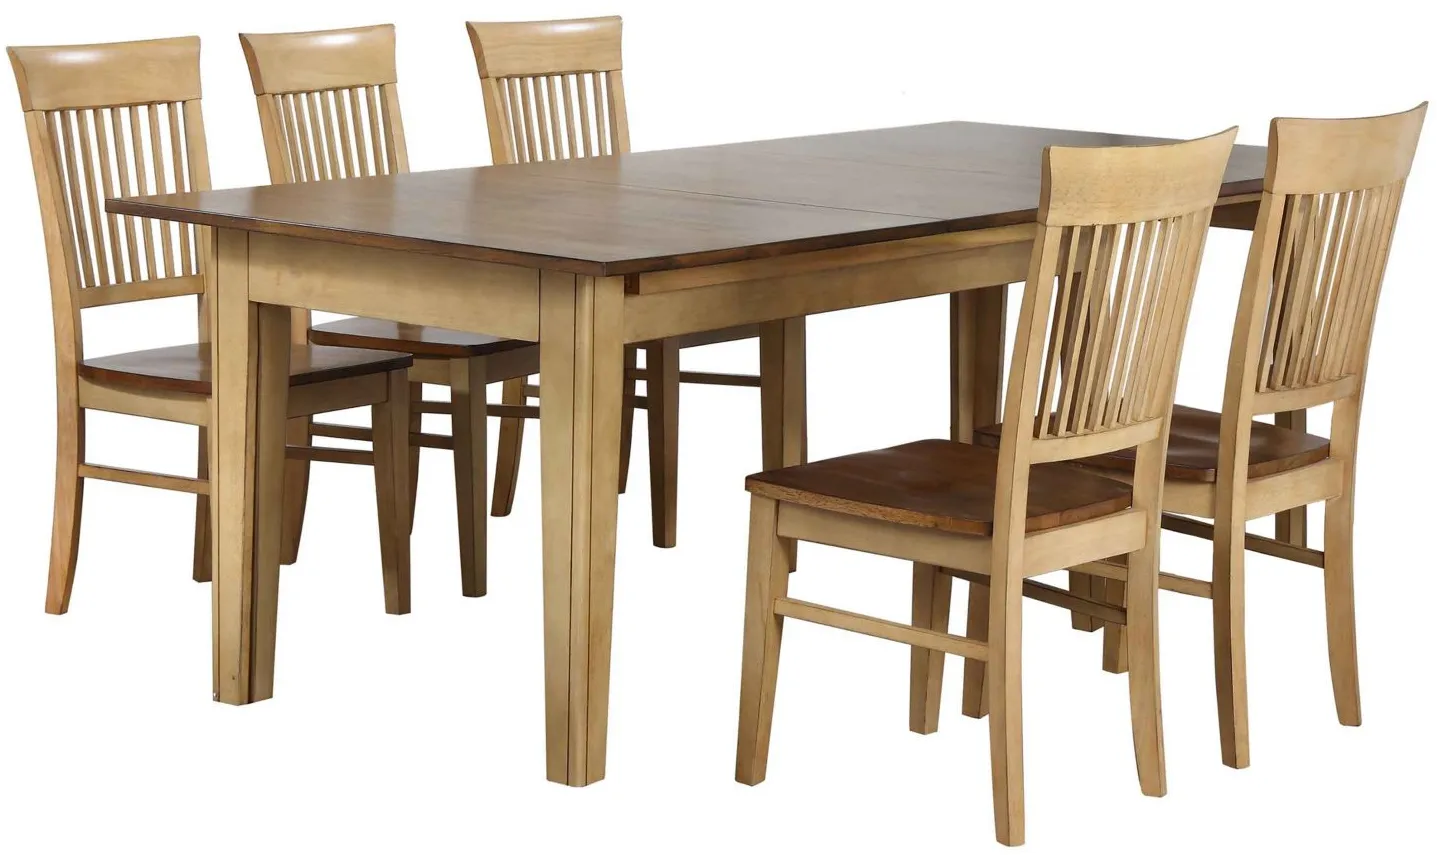 Brook 5-pc. Dining Set in Wheat and Pecan by Sunset Trading